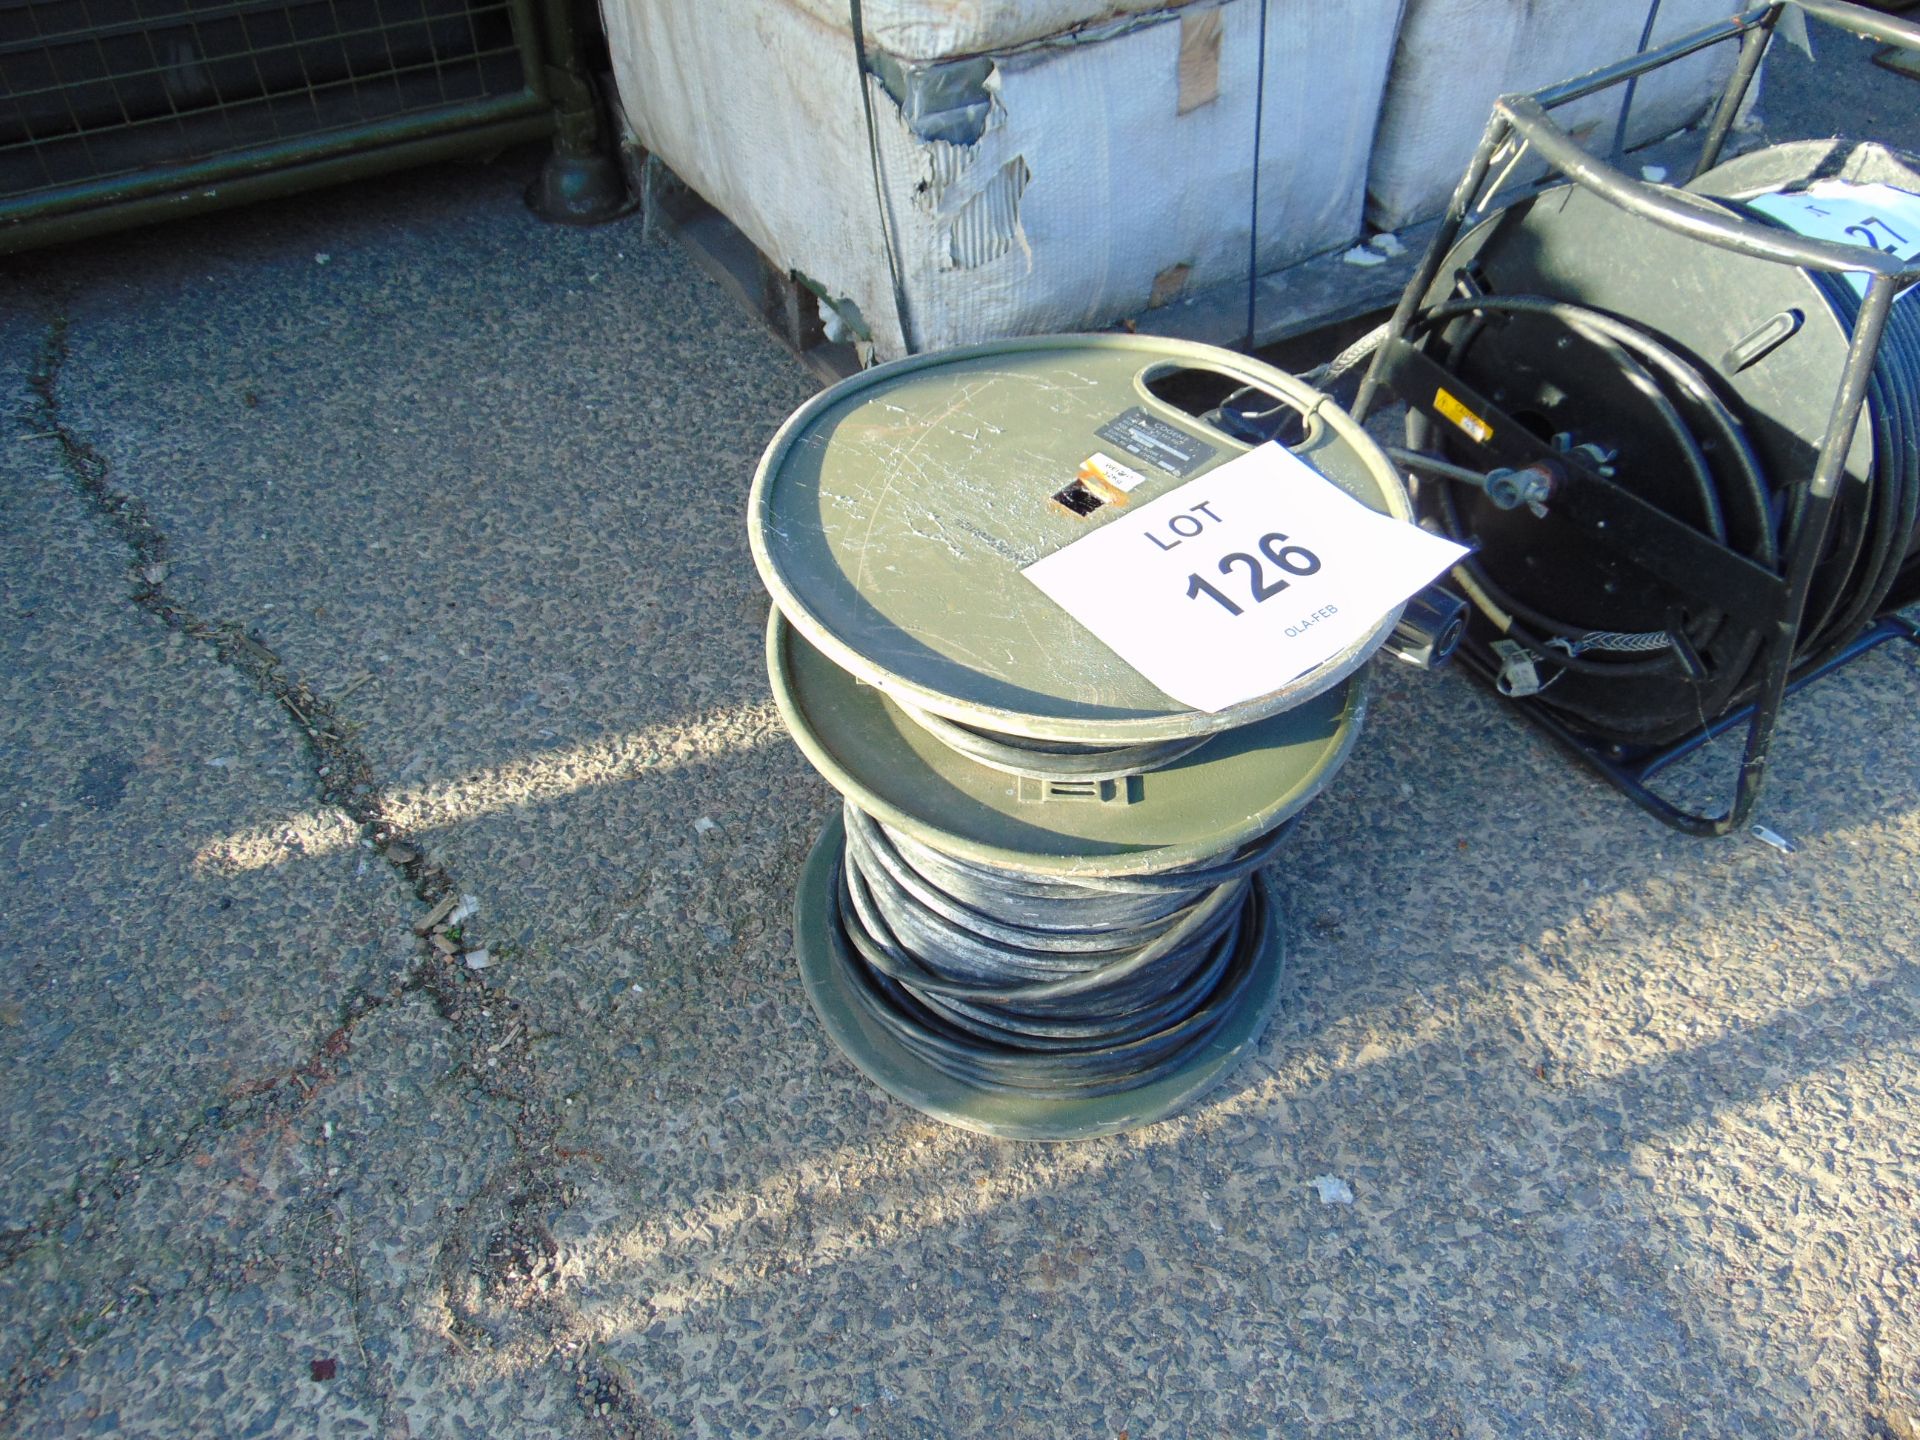 1x Roll of 240 Volt HD Generator Cable on Reel c/w Plugs - Image 5 of 5